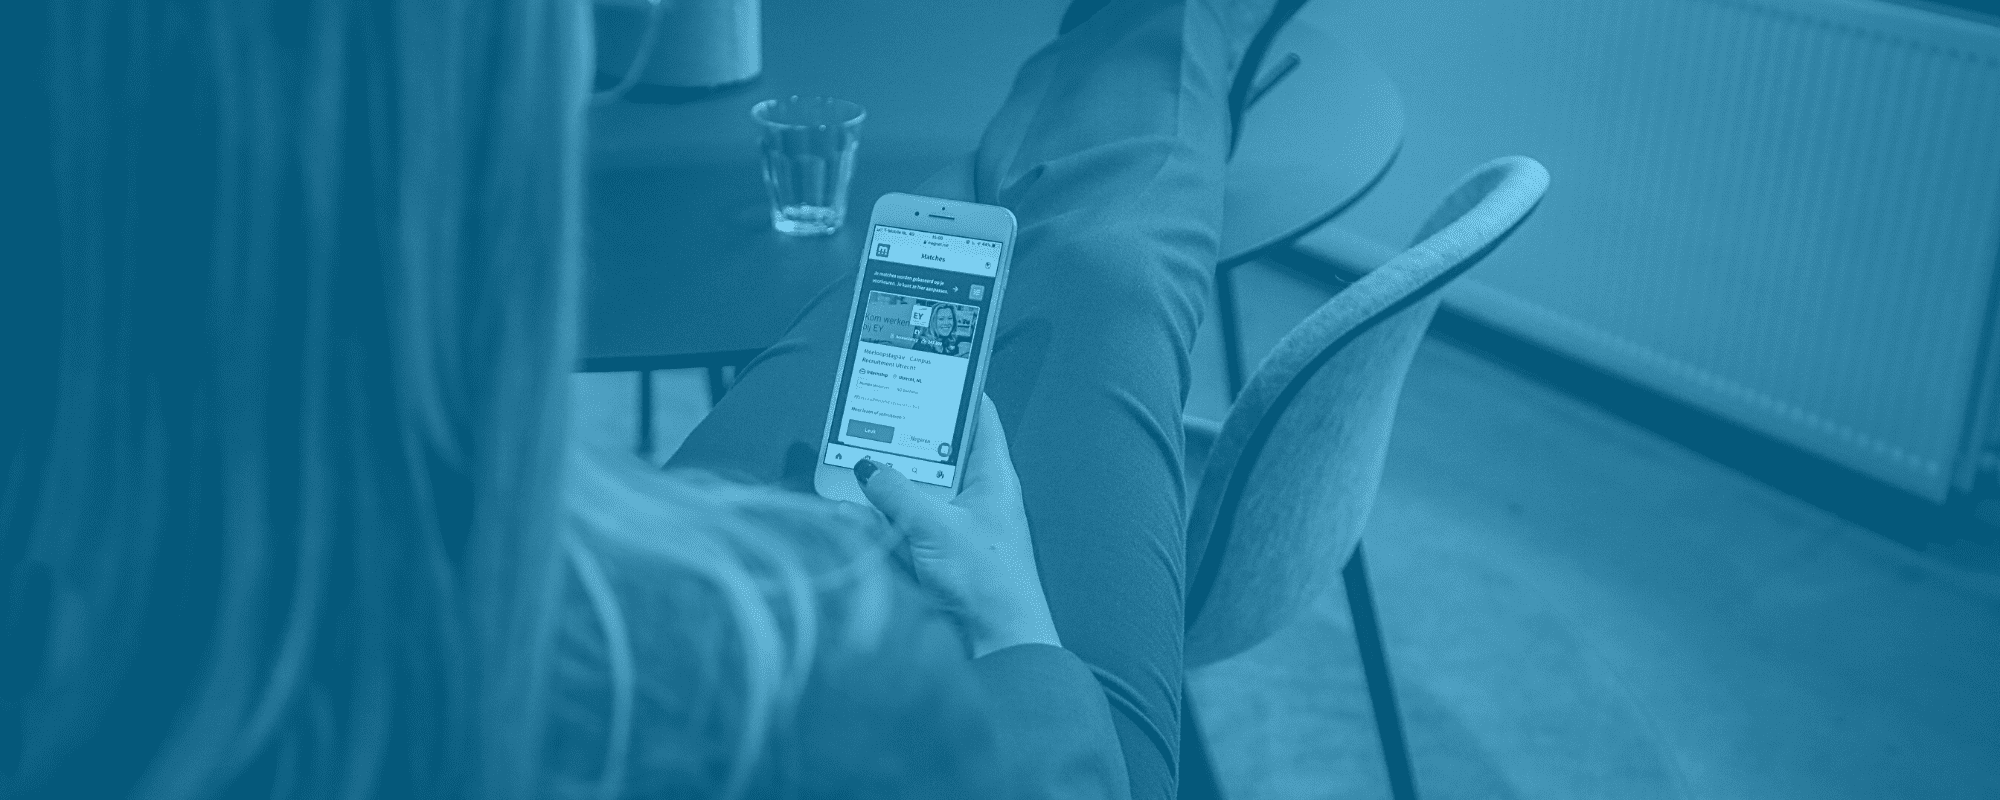 The Future Is Now: The Case Of Event App Design